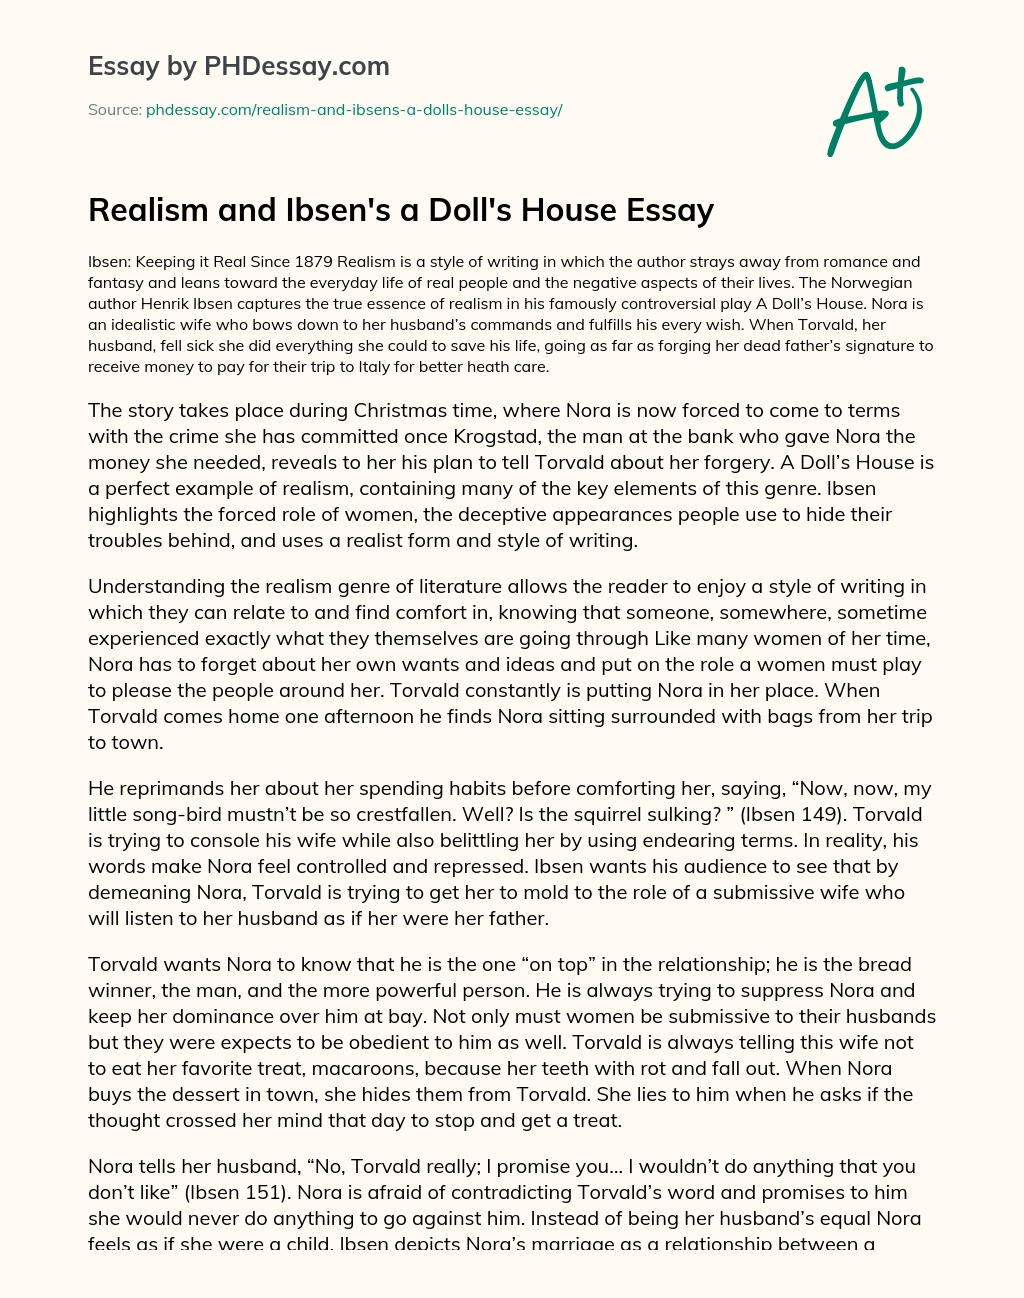 Realism and Ibsen’s a Doll’s House Essay essay